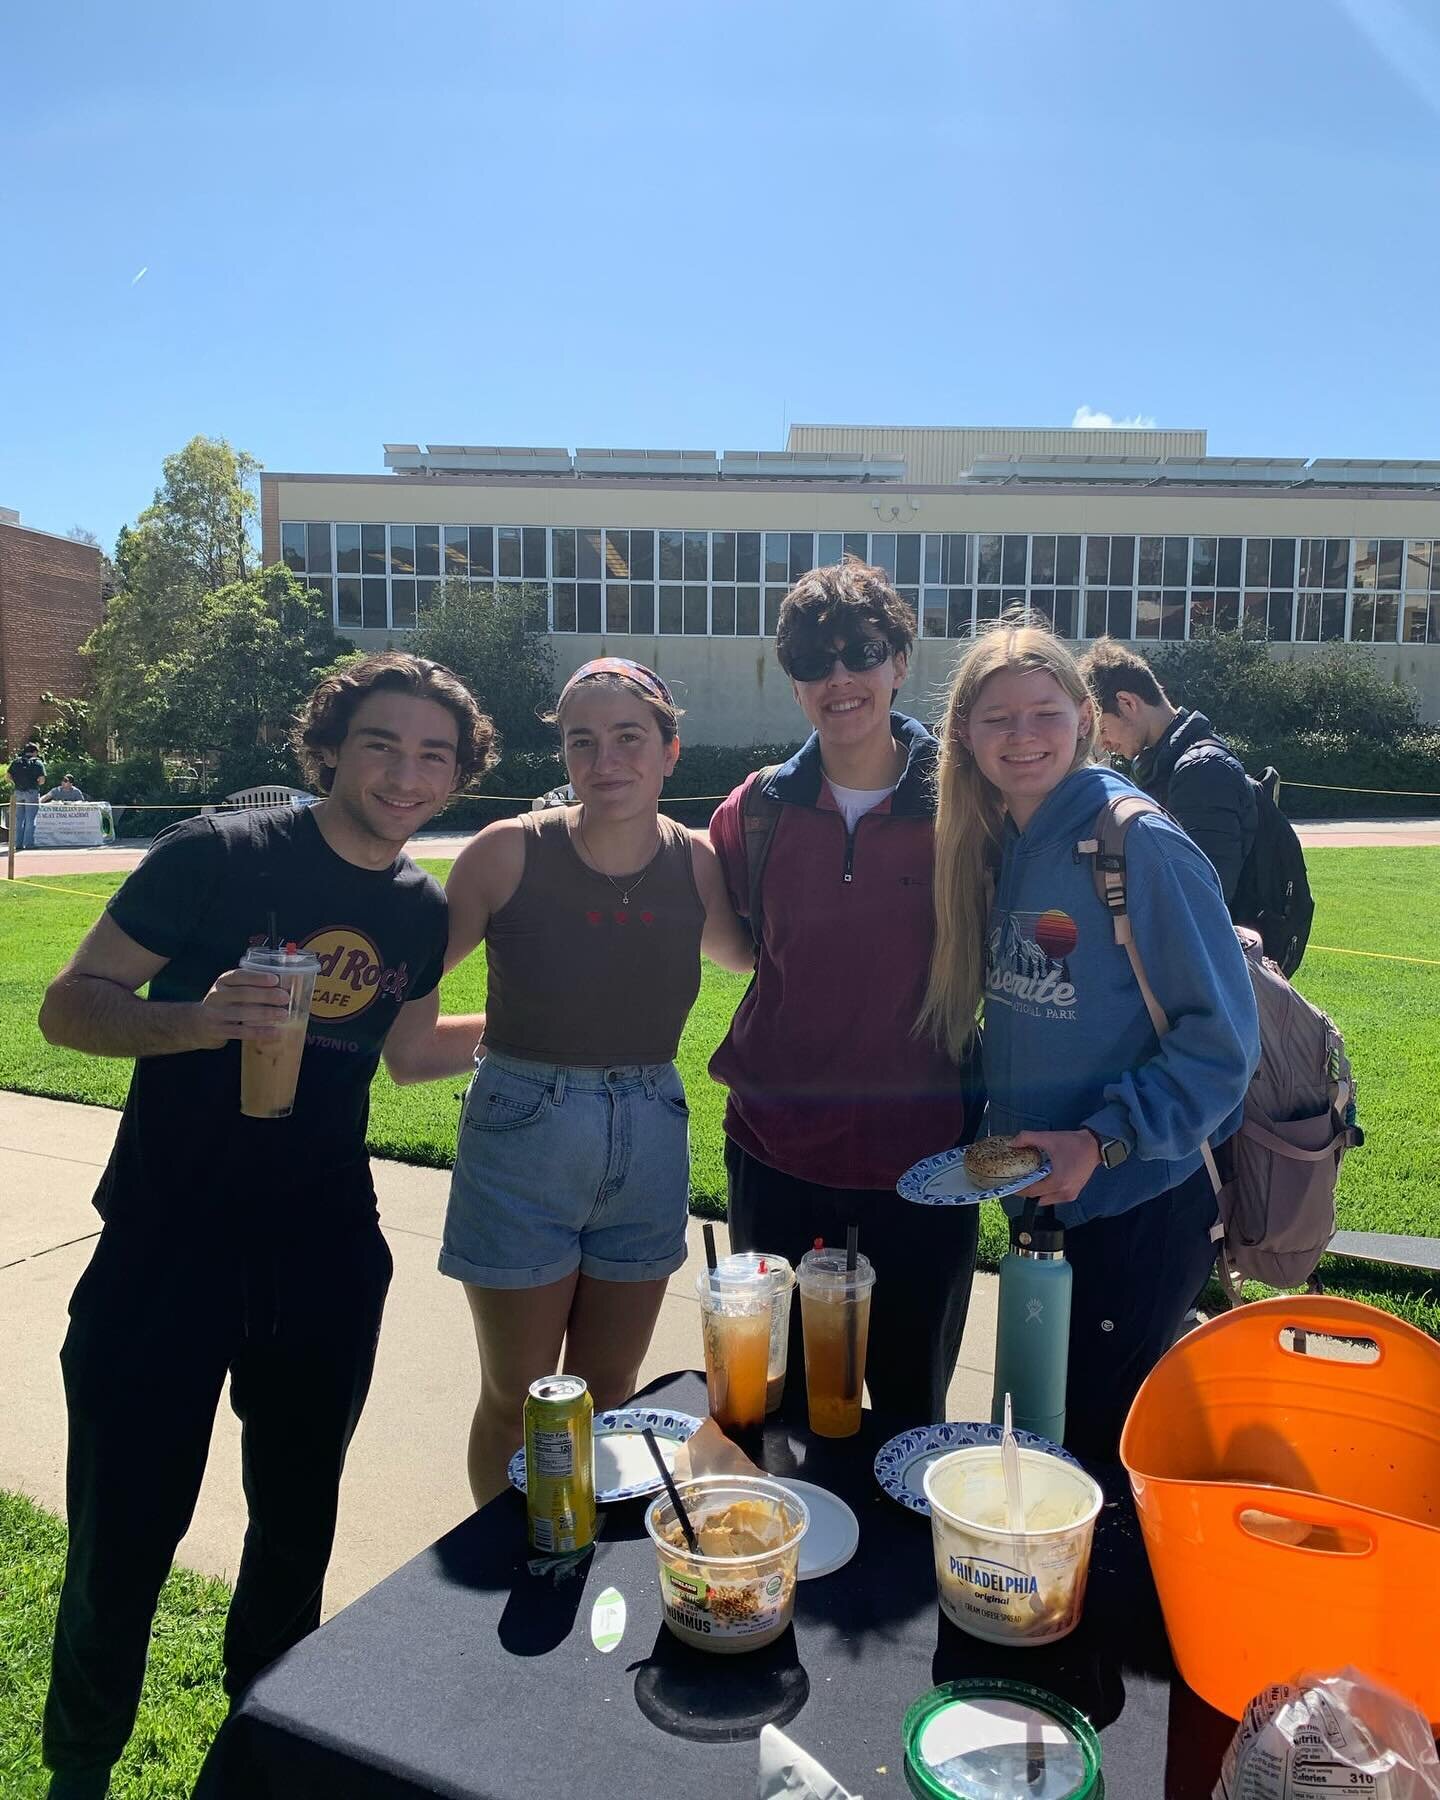 It was so great to see everyone today at bagels! 🥯 Join us on Thursday on Dexter lawn at 11am for pizza 🍕